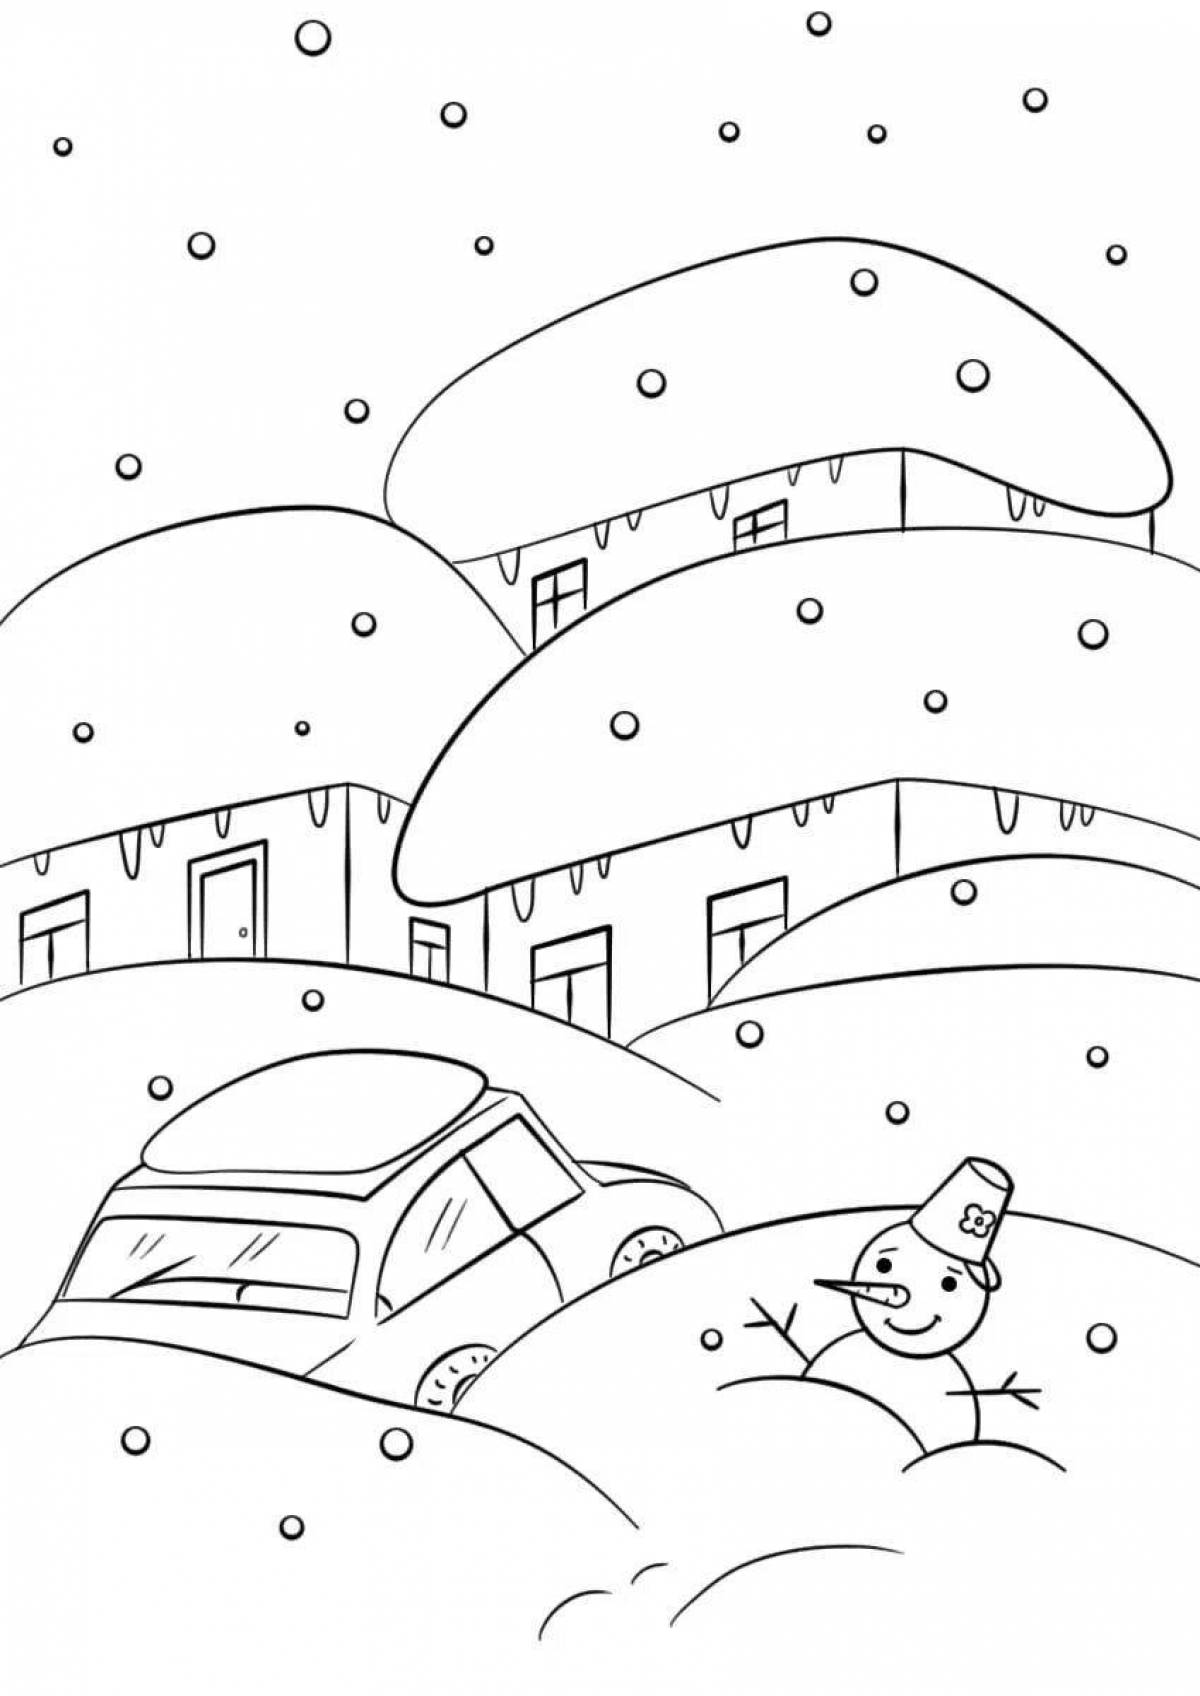 Shiny snowdrift coloring page